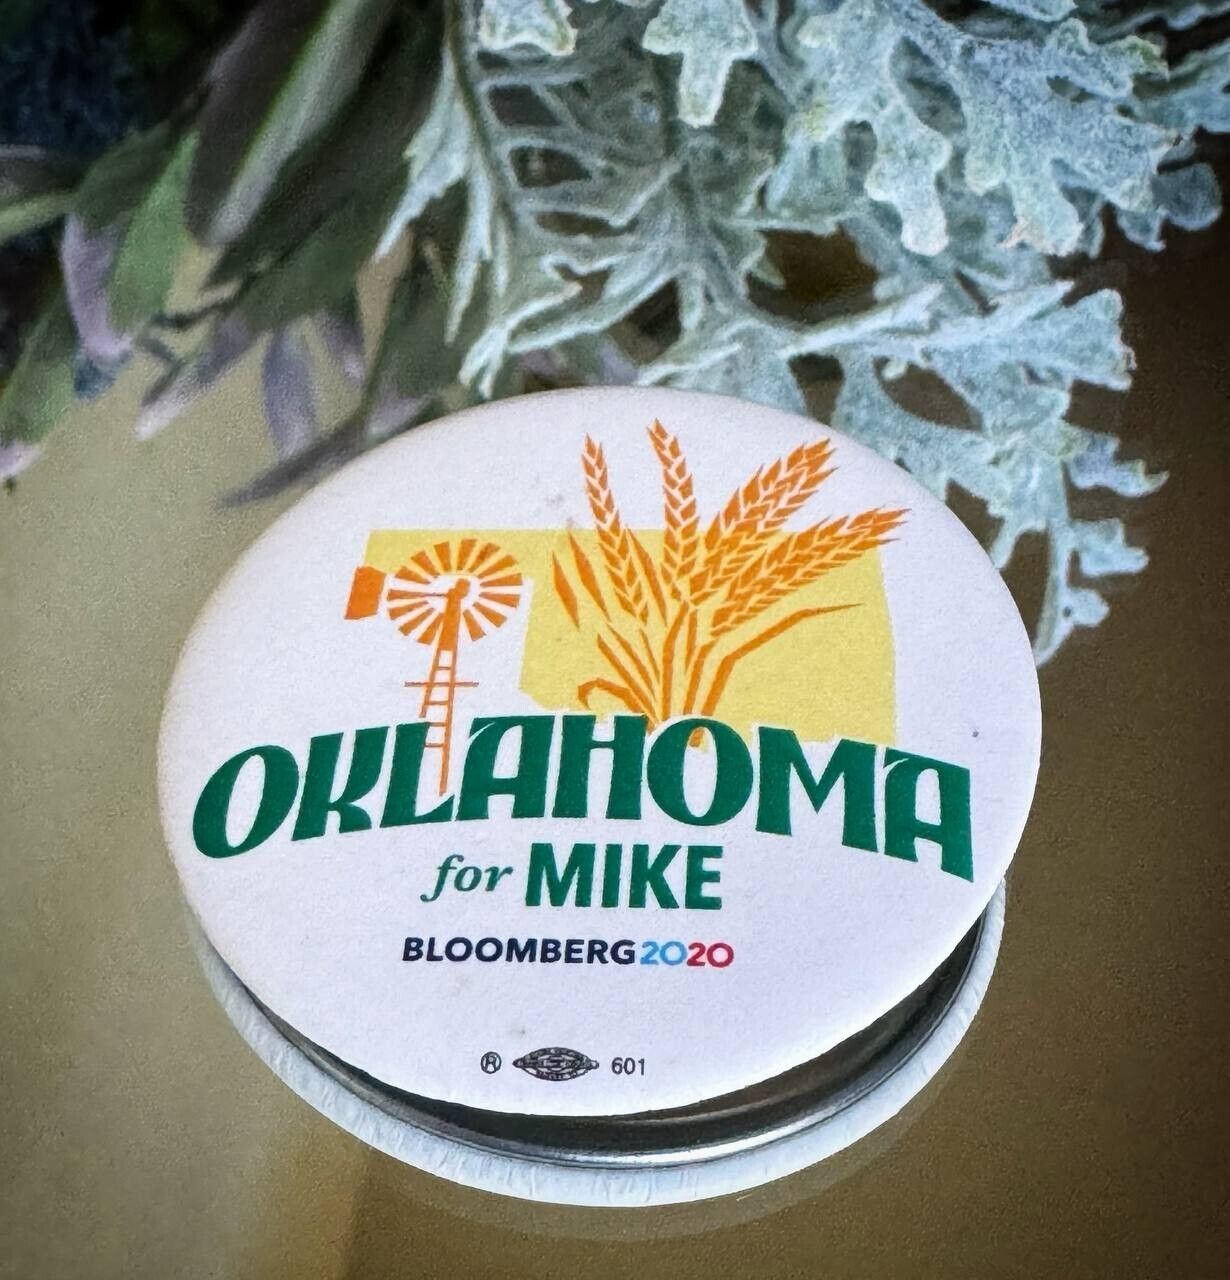  Oklahoma for MIKE bloomberg 2020 Button Badge Shirt Pin Clip On